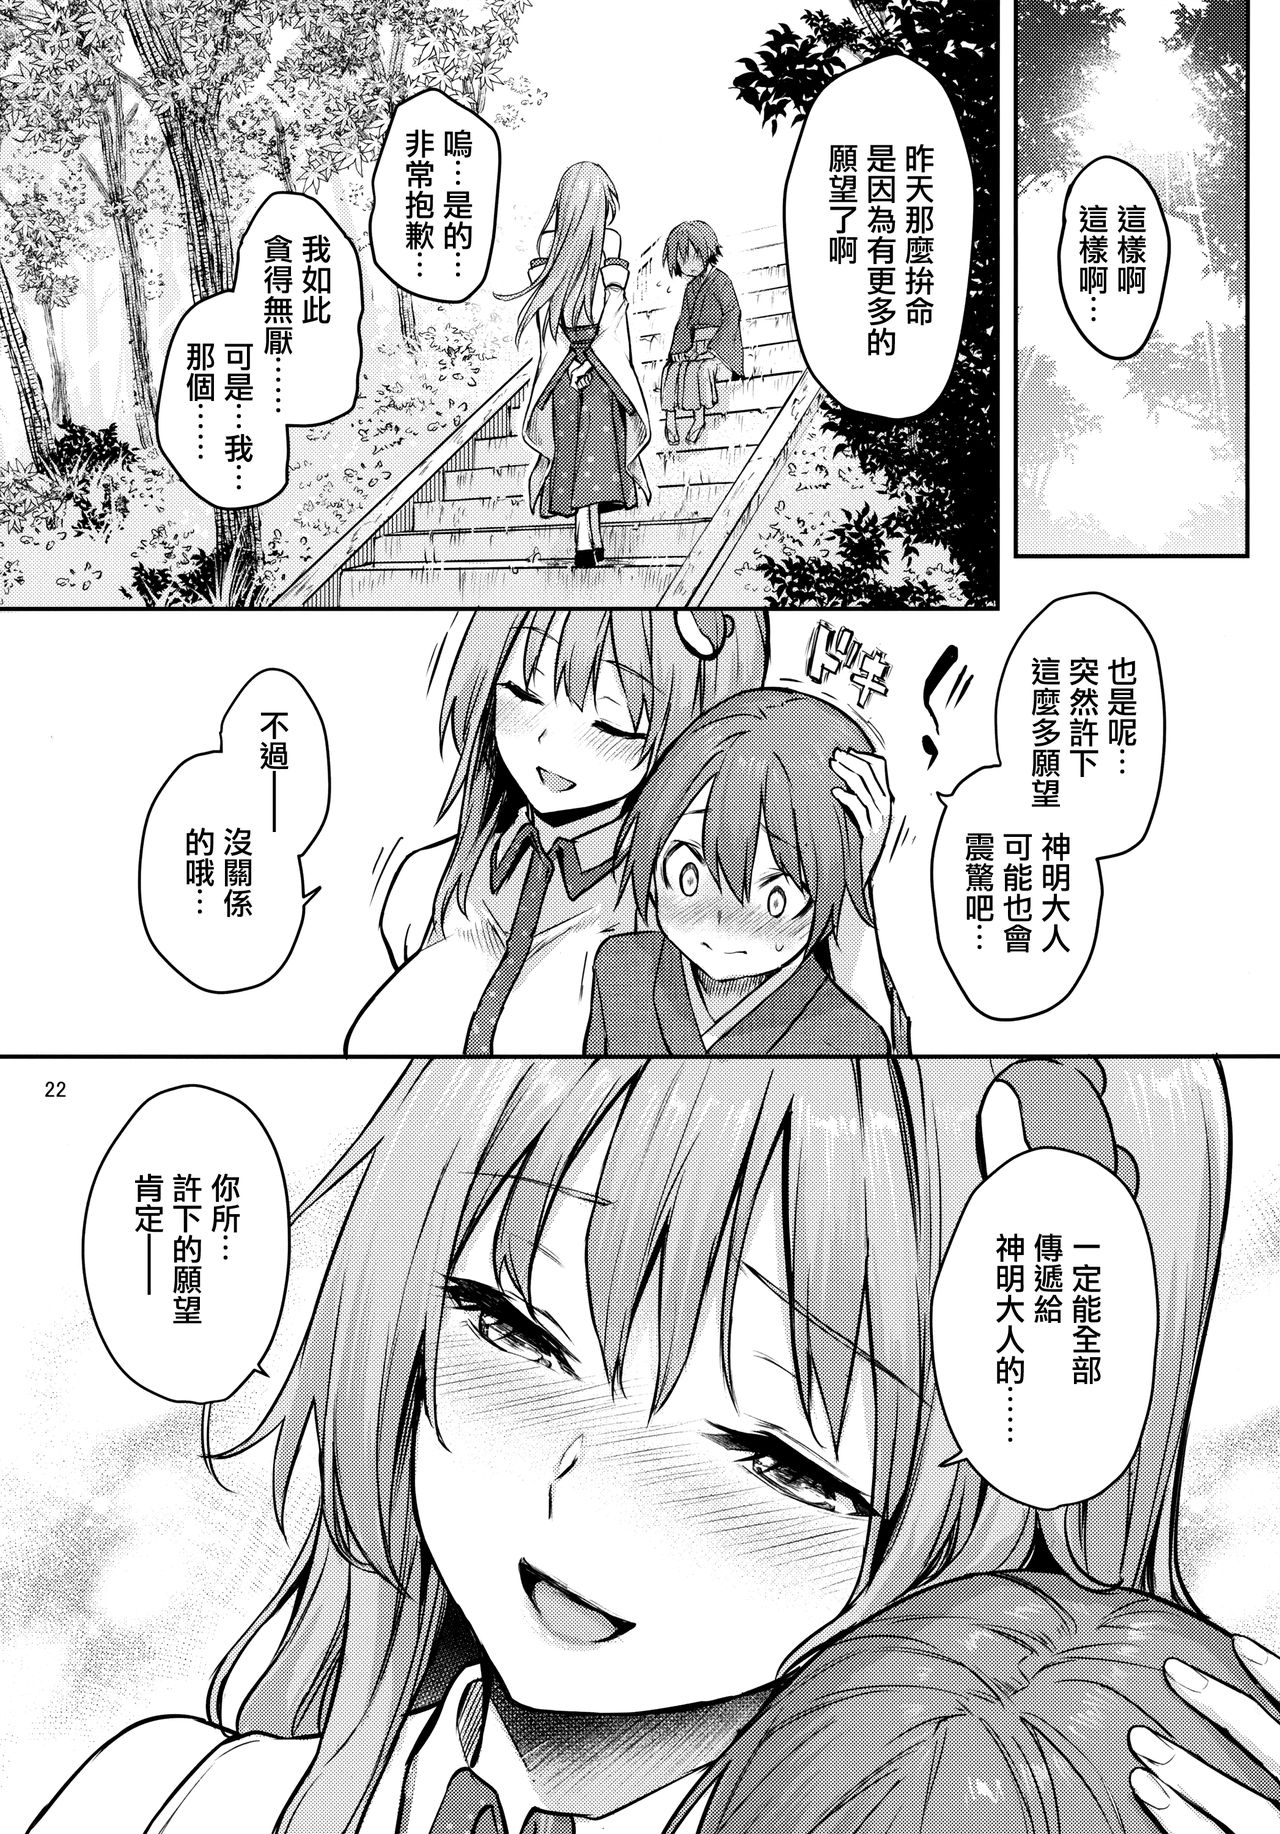 (C96) [あんみつよもぎ亭 (みちきんぐ)] ANMITSU TOUHOU THE AFTER Vol.2 (東方Project) [中国翻訳]